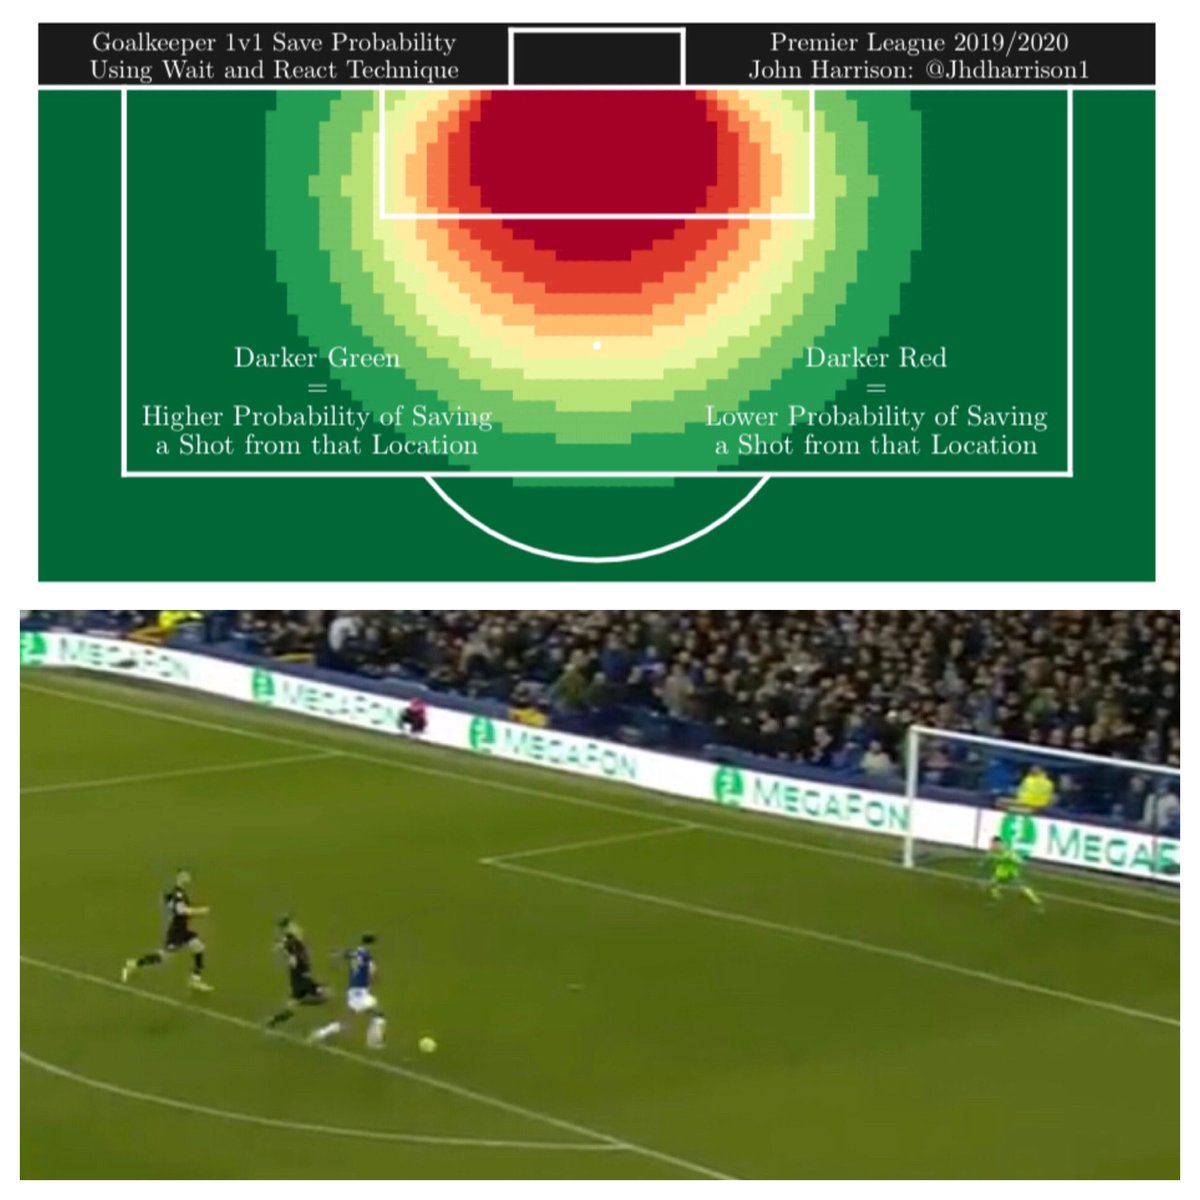 Here is the save probability for the wait & react technique assuming a 1v1 with the ball on the ground & where the GK was not out of position (a traditional 1v1).Waiting maximises reaction time but doesn’t narrow the goal:Long range = strategyClose range = strategy